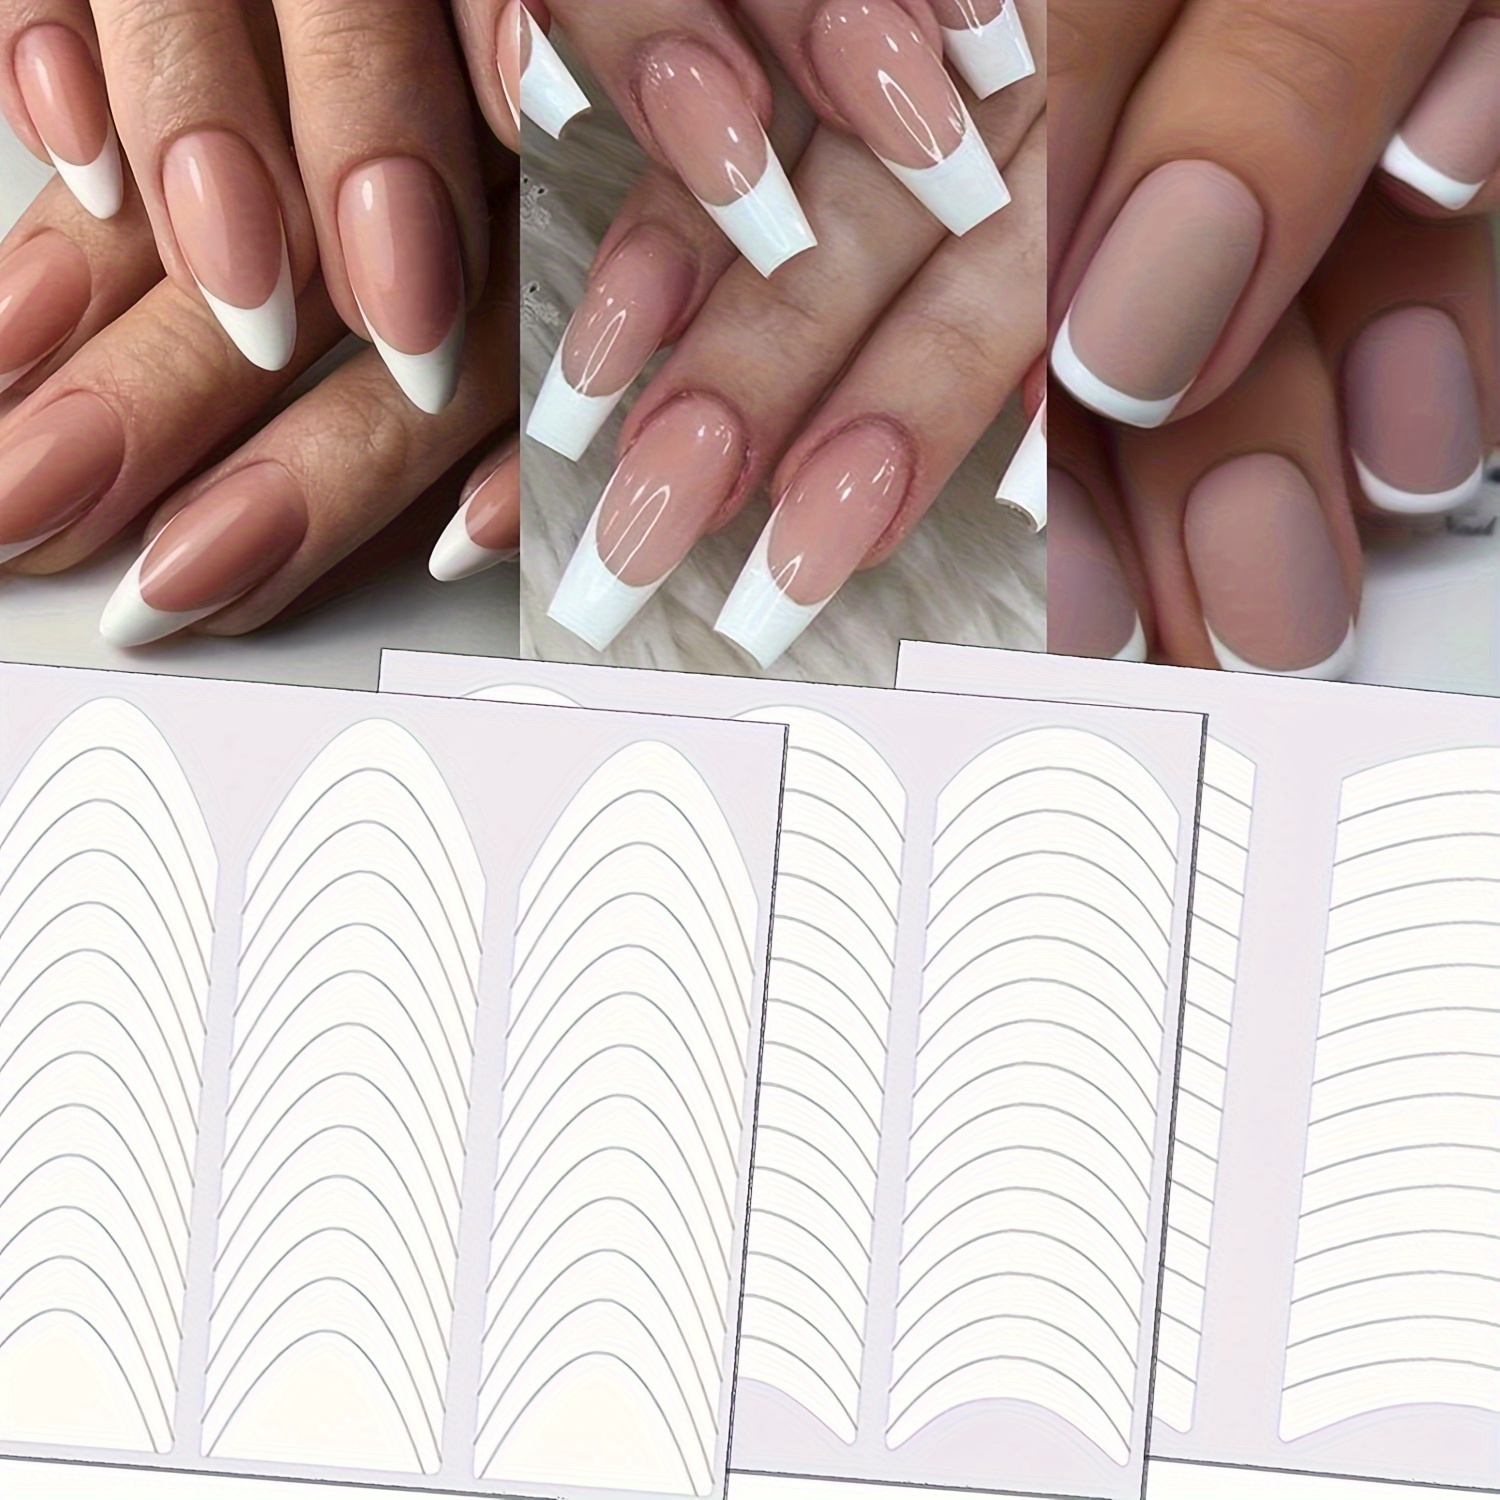 

730pcs Embroidered French Manicure Stickers, Fantasy Themed, Self-adhesive Nail Art, Stripe Guides